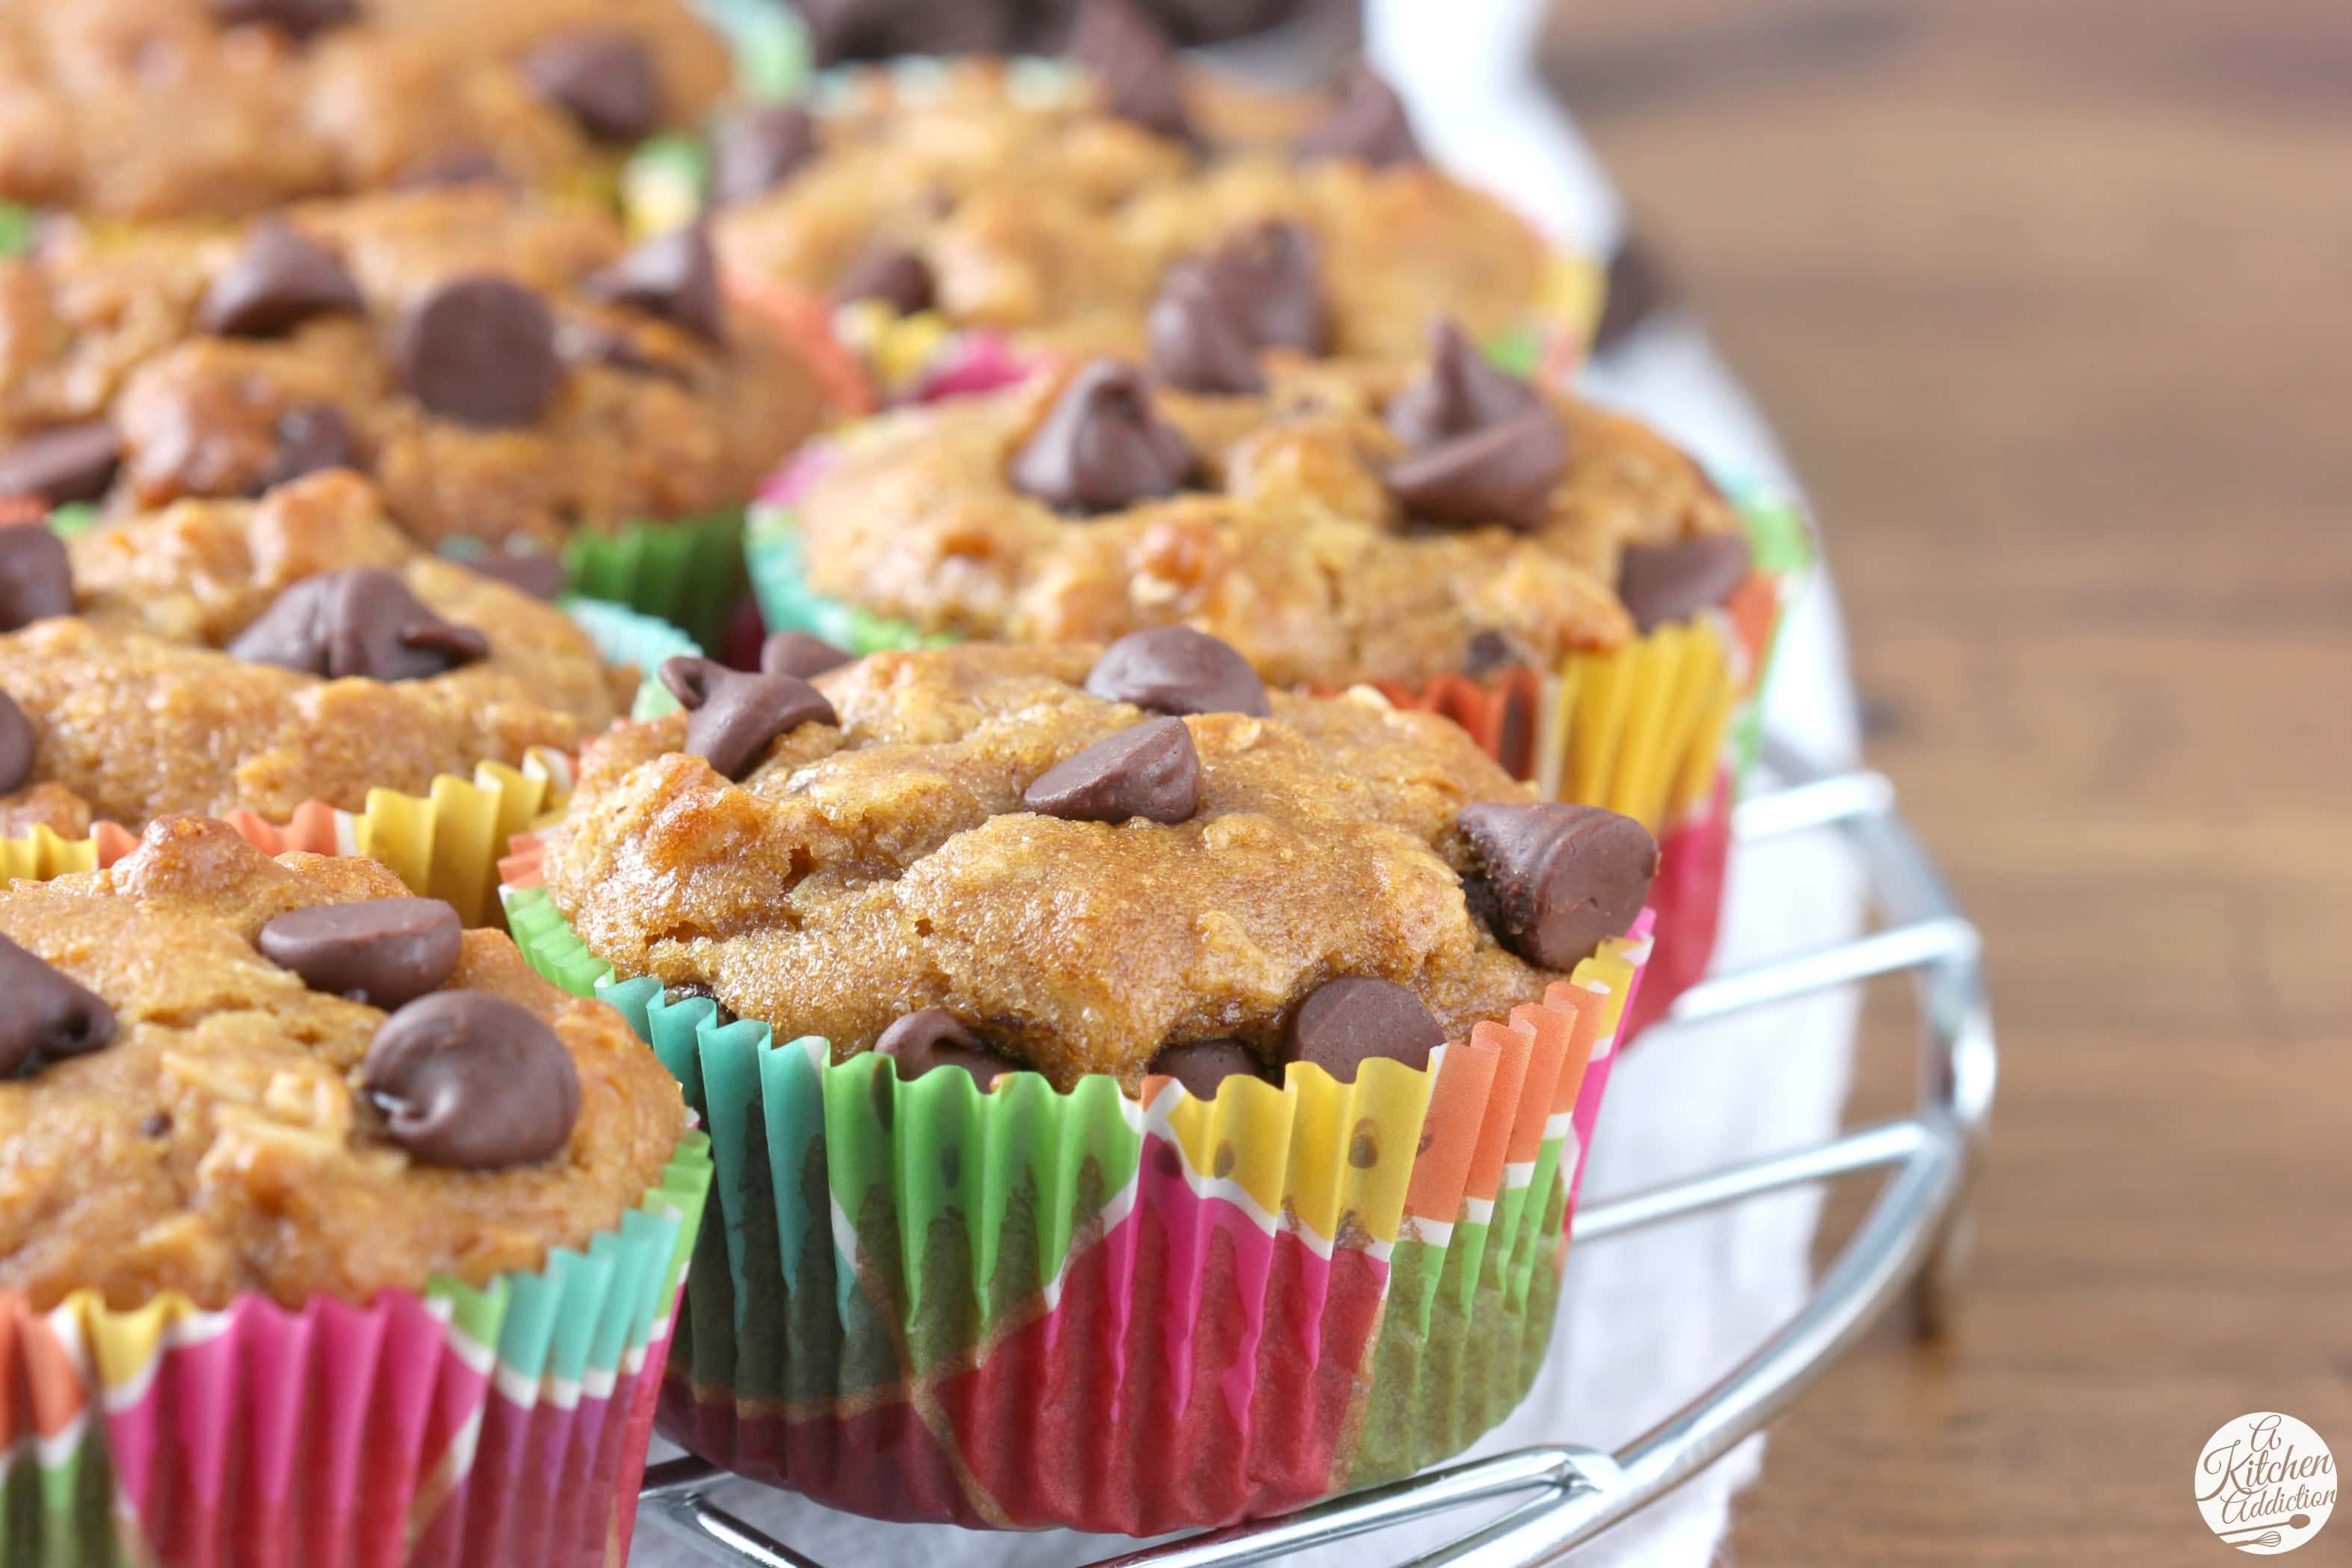 Whole Wheat Peanut Butter Chocolate Chip Oat Muffins Recipe from A Kitchen Addiction